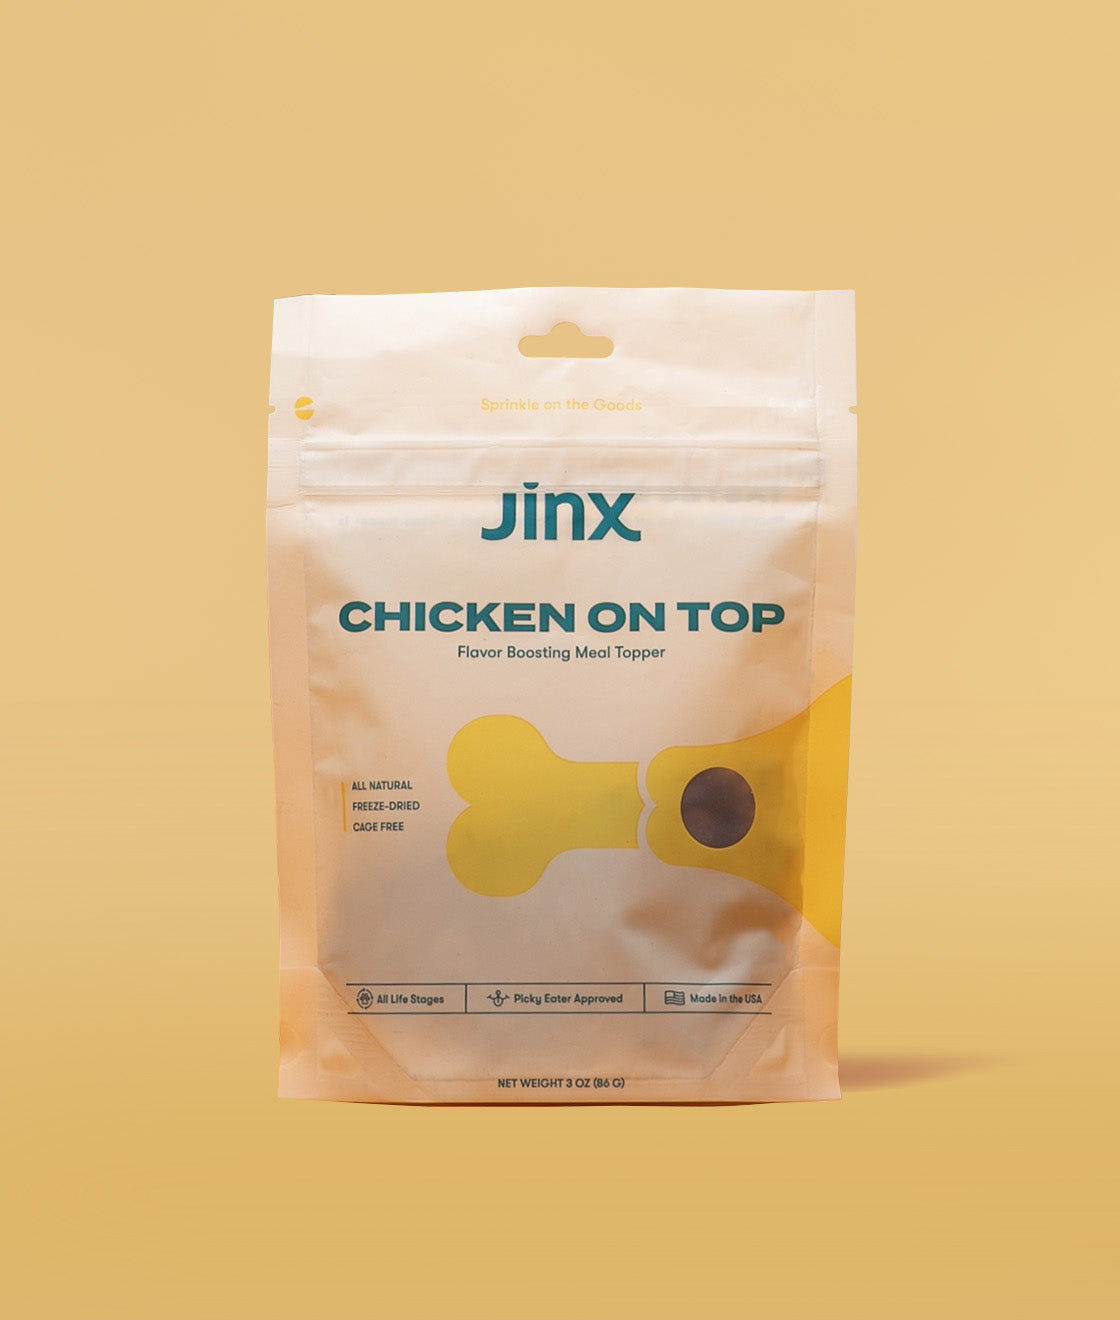 Chicken topper Jinx product packaging on a yellow background